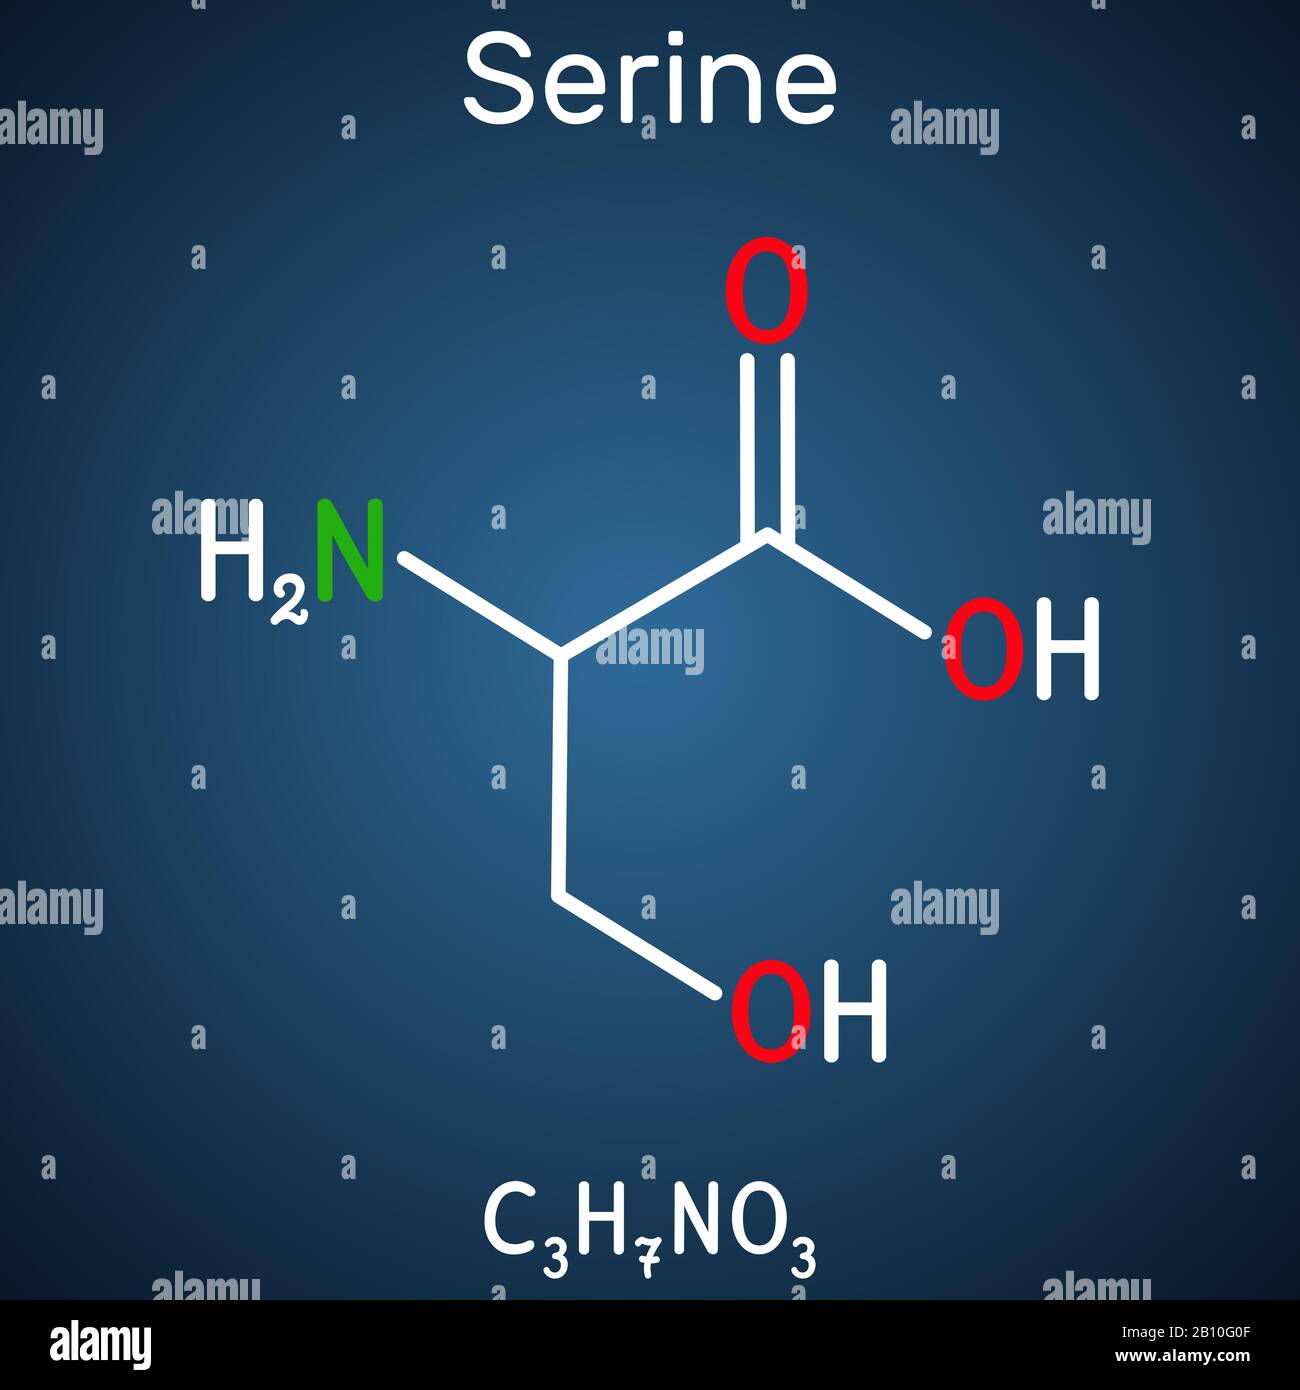 Serine, Ser amino acid molecule. It is used in the biosynthesis of protein. Structural chemical formula on the dark blue background. Vector illustrati Stock Vector